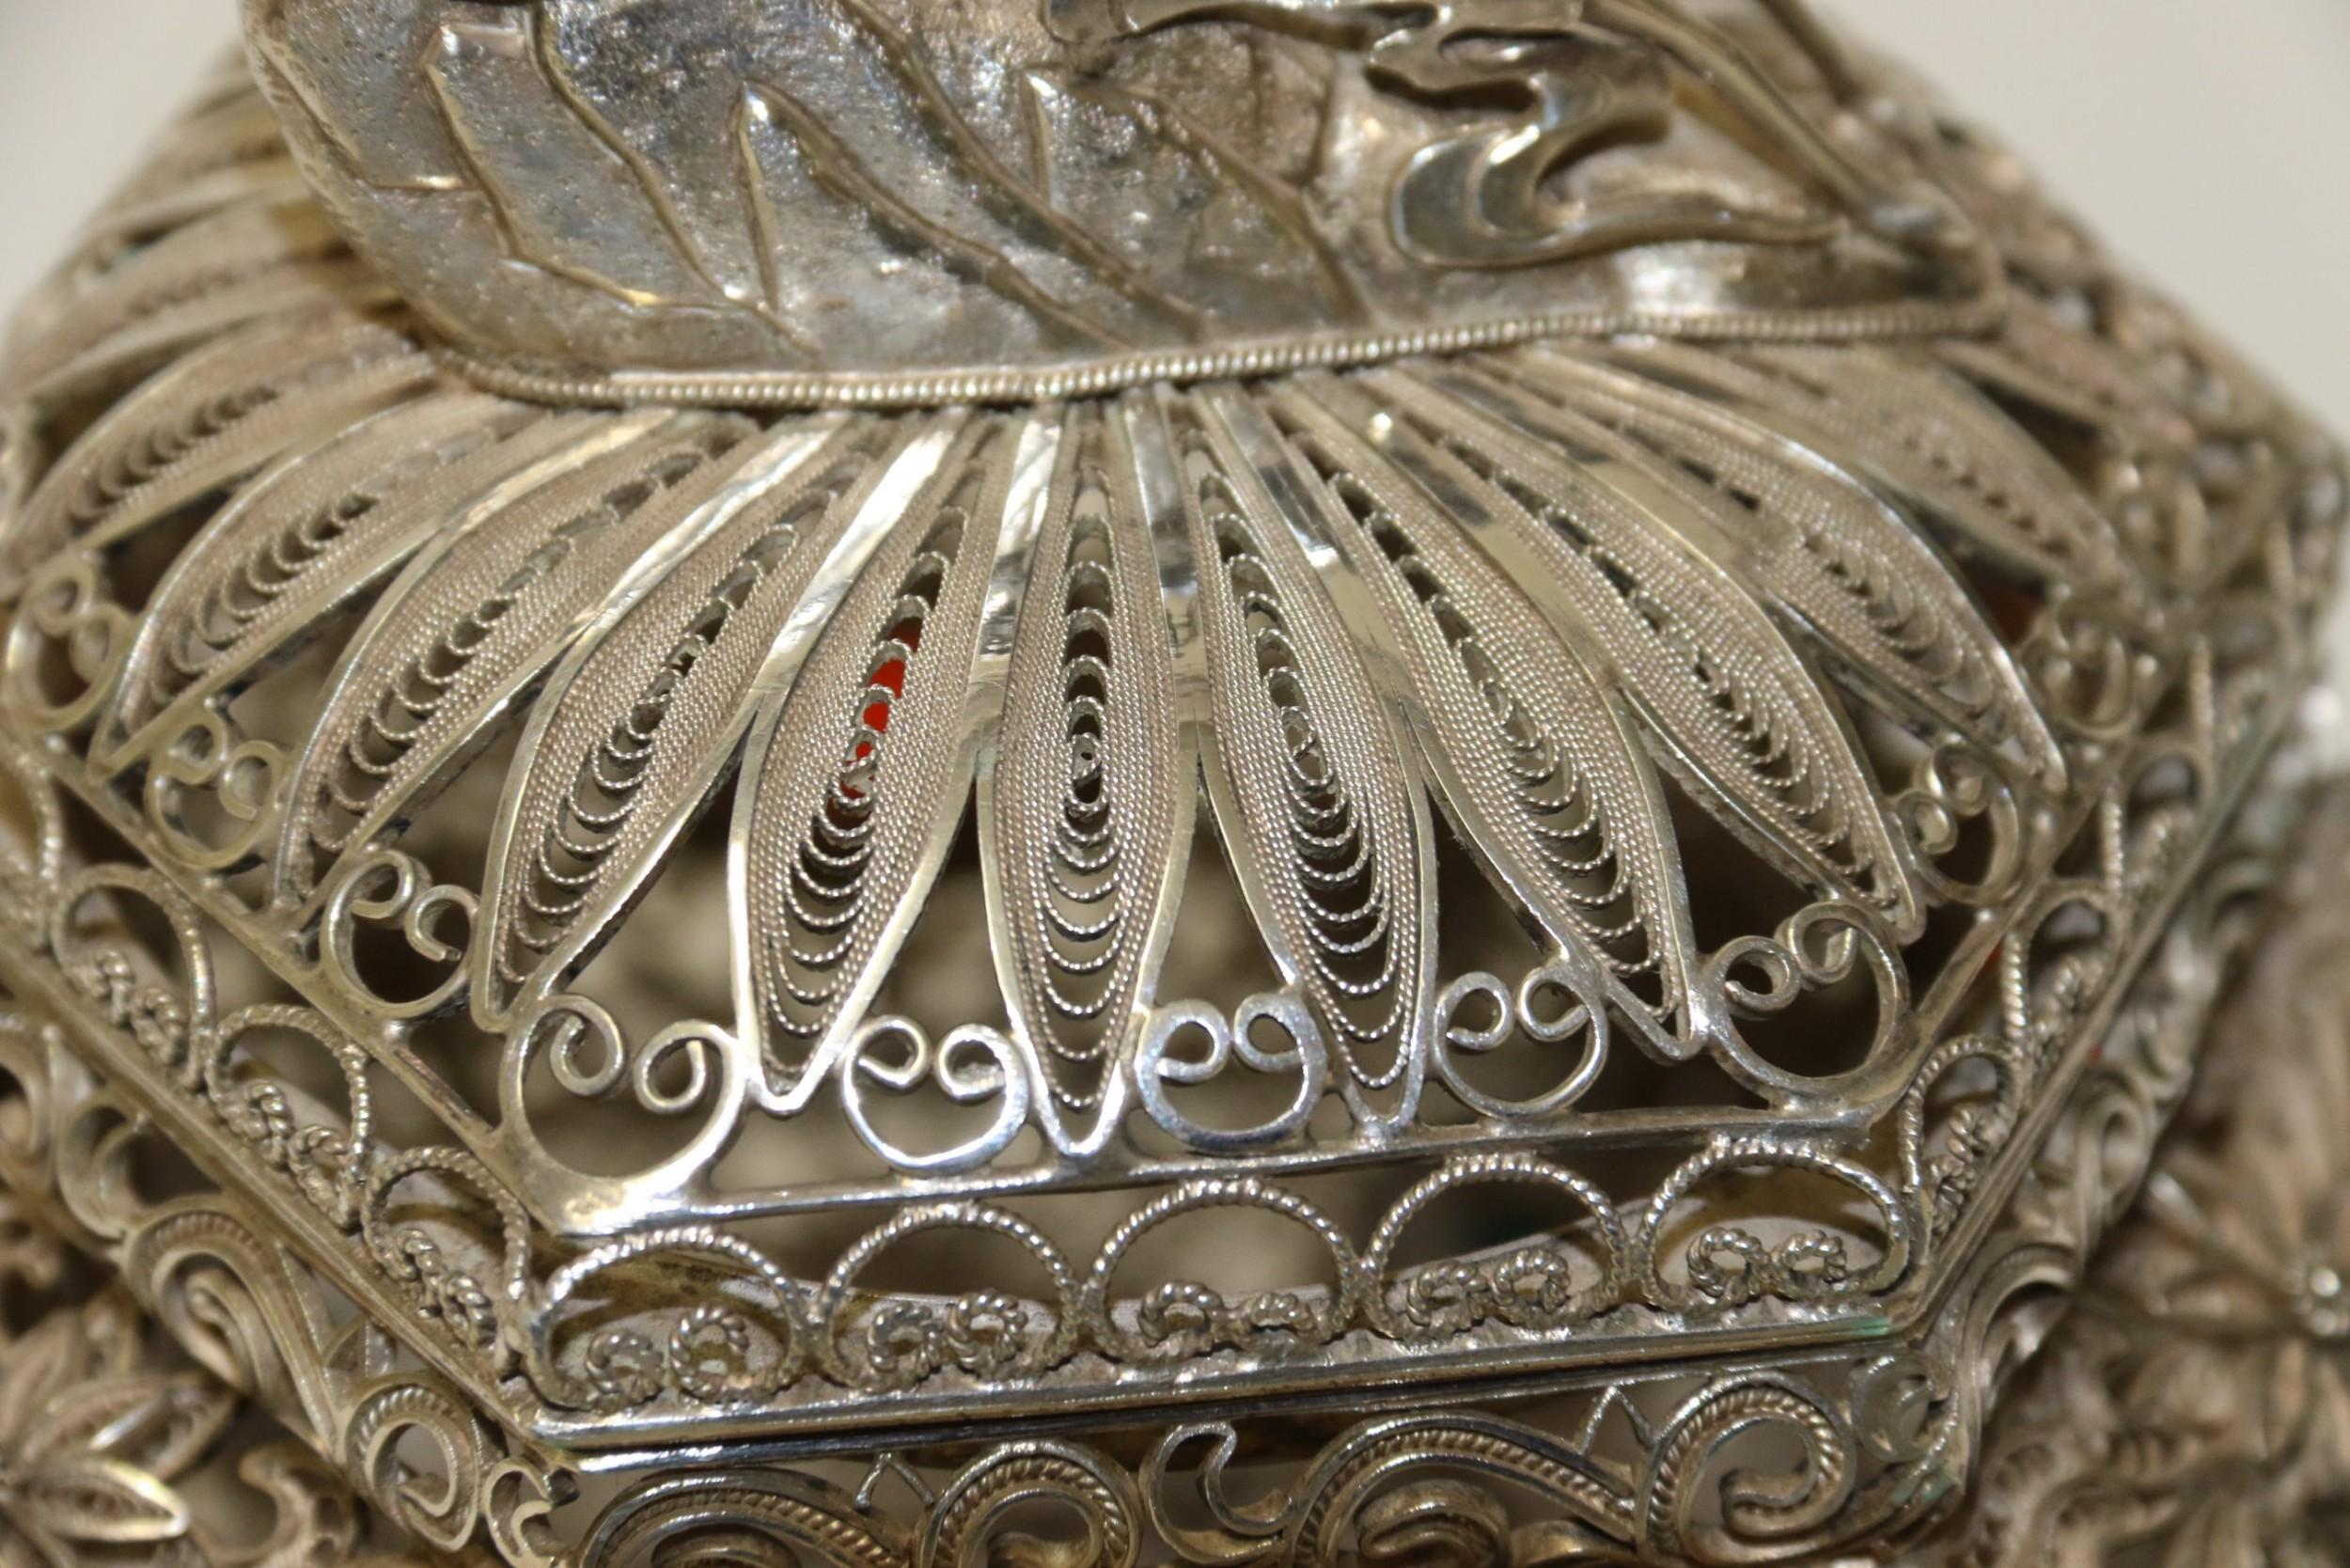 19th Century Indian Silver Filigree Work Incense Burner with Mounted Cabochons For Sale 11